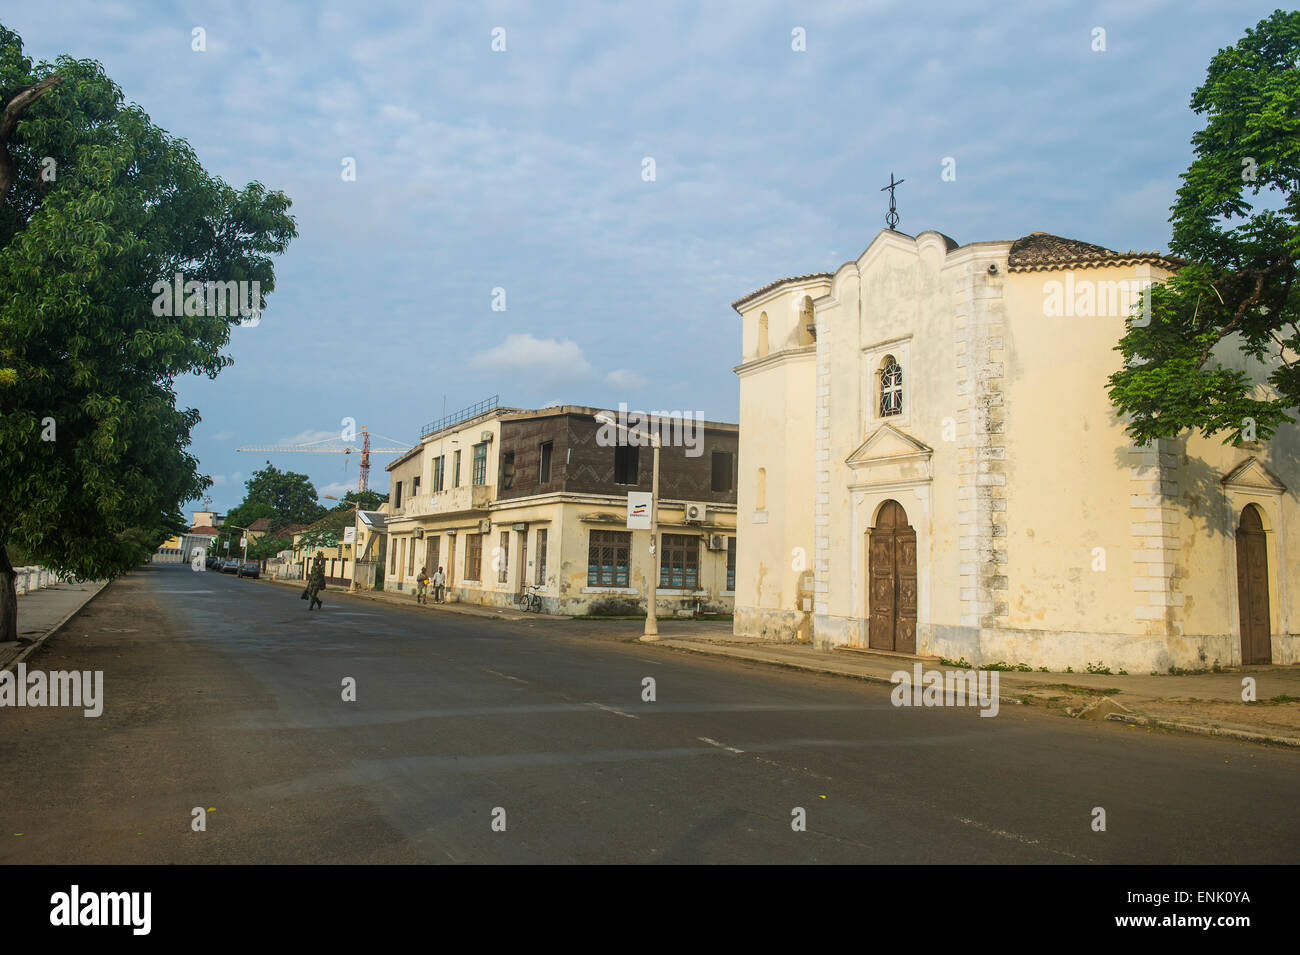 Colonial houses in the city of Sao Tome, Sao Tome and Principe, Atlantic Ocean, Africa Stock Photo